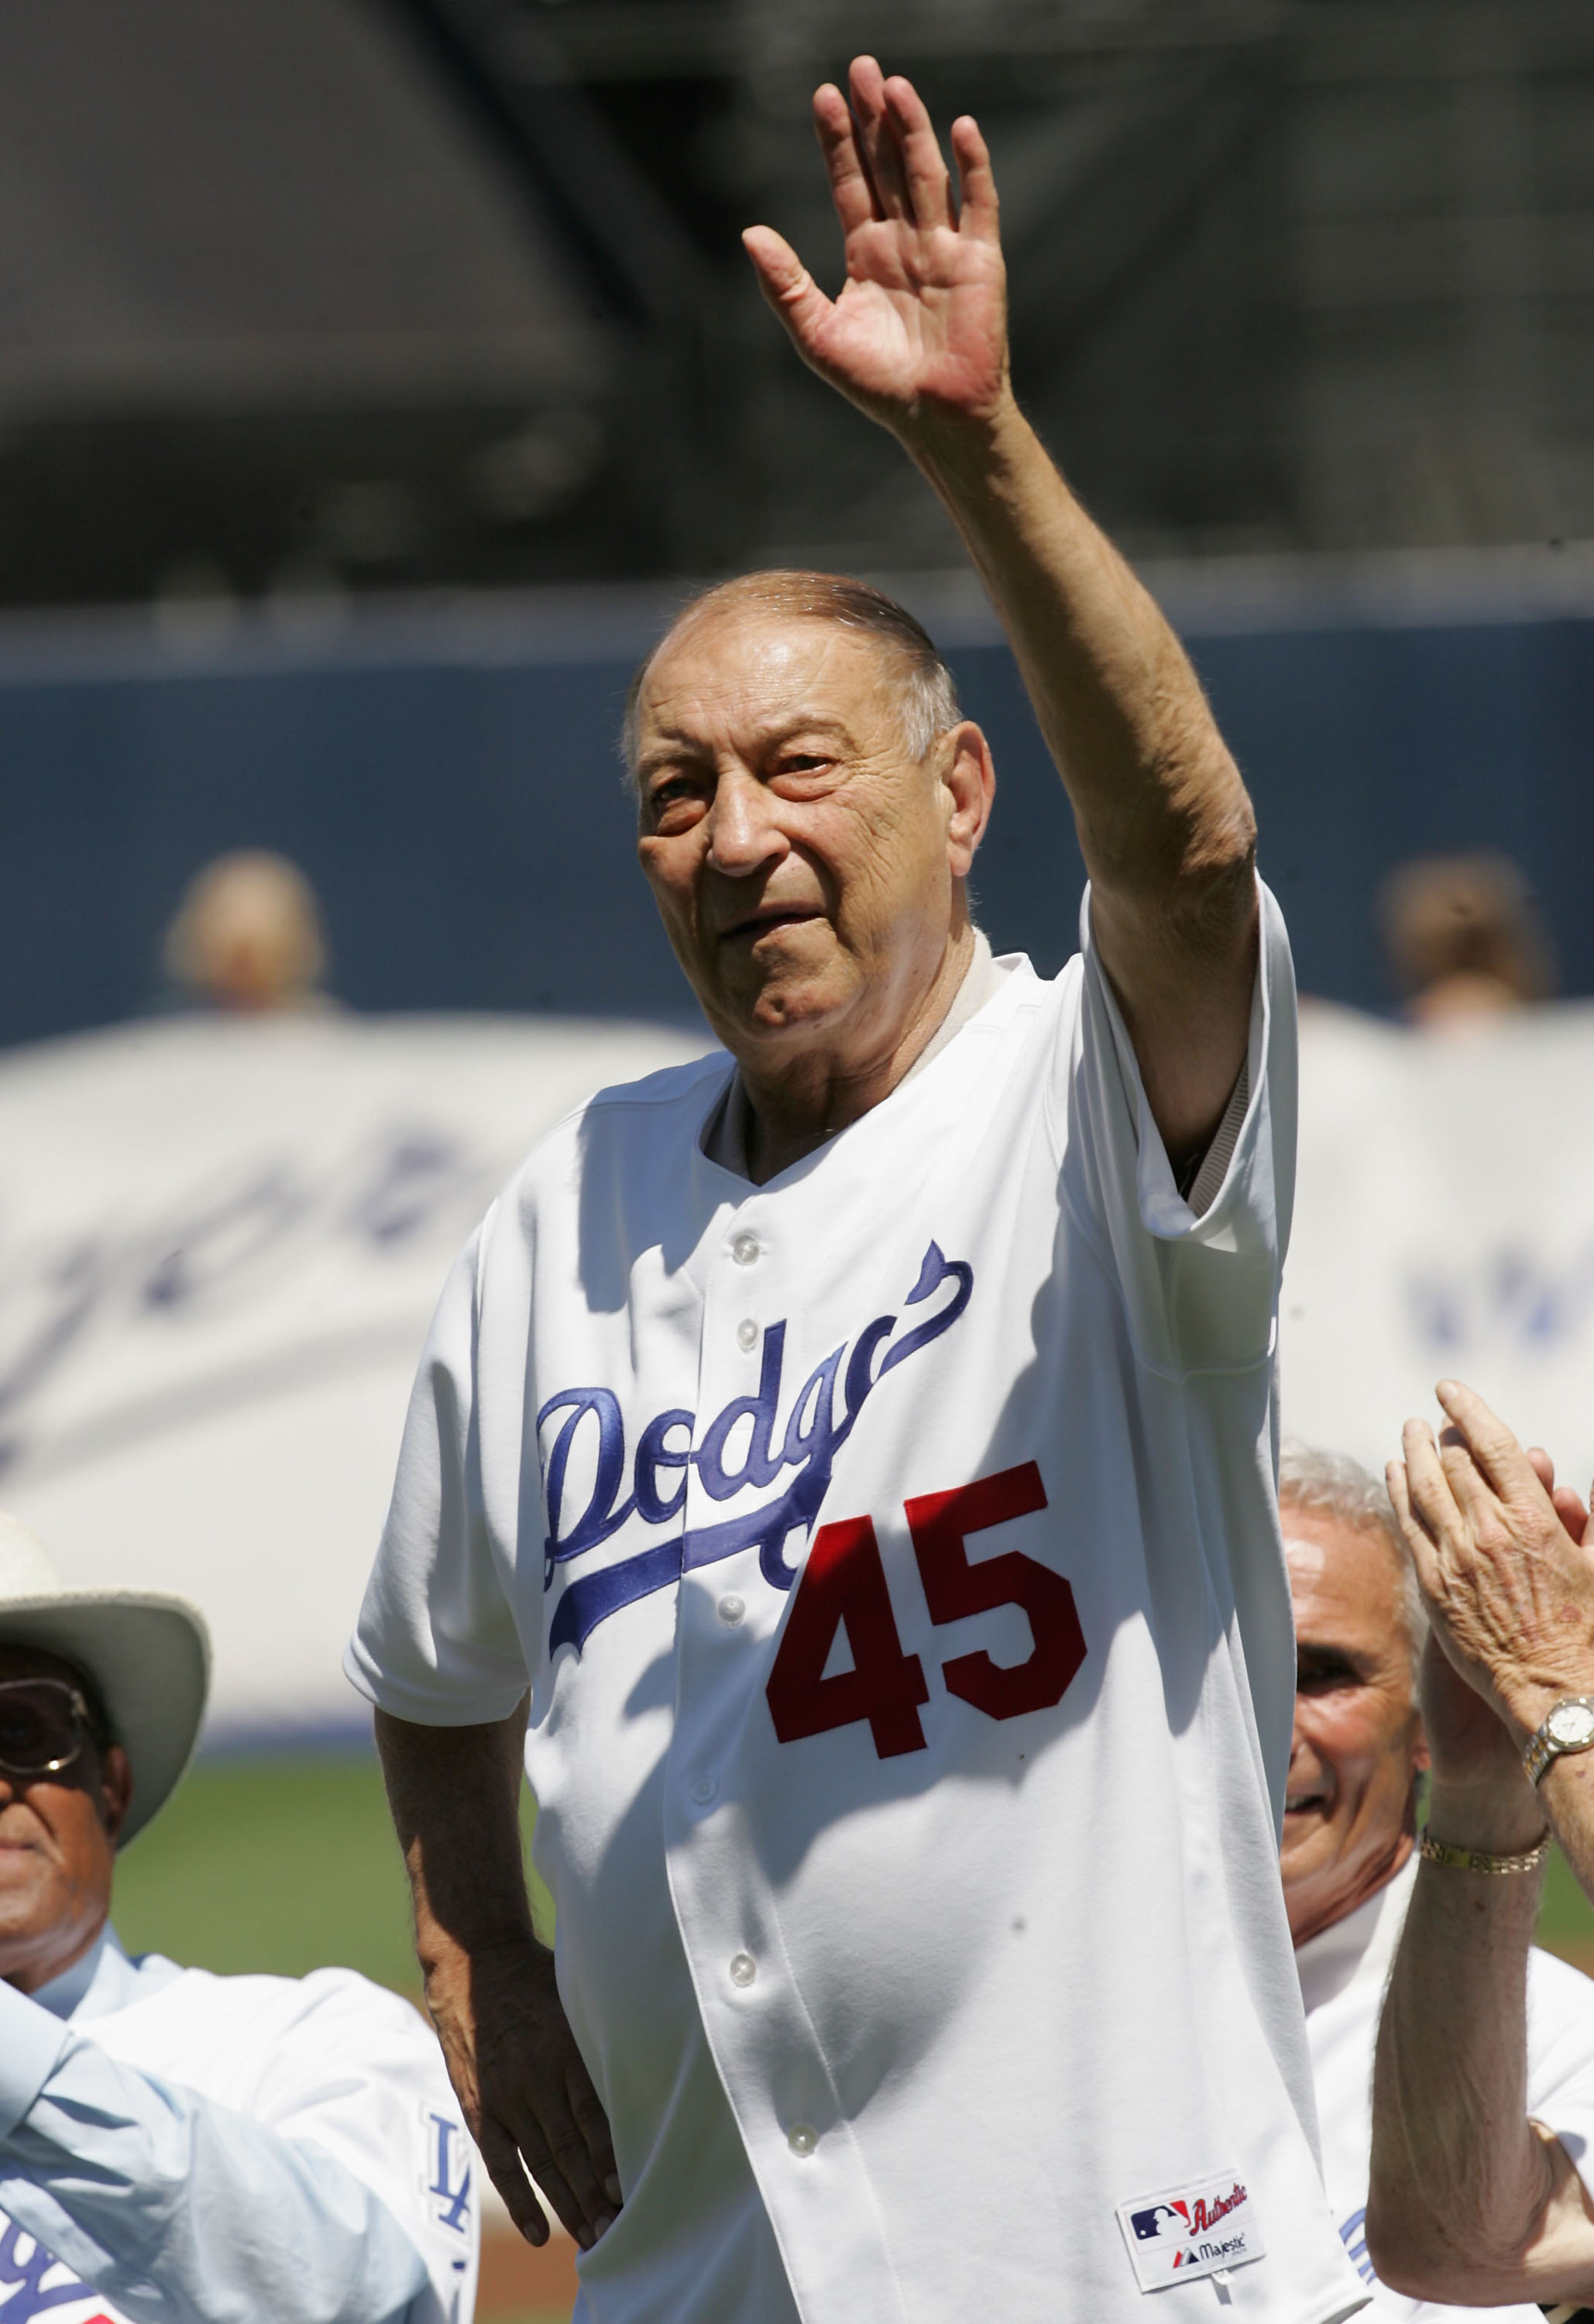 LOS ANGELES - AUGUST 28: Former Pitcher Johnny Podres of the Los Angeles Dodgers waves to the crowd during ceremonies honoring memebers of the 1955 World Champion Dodgers before the game with the Houston Astros on August 28, 2005 at Dodger Stadium in Los